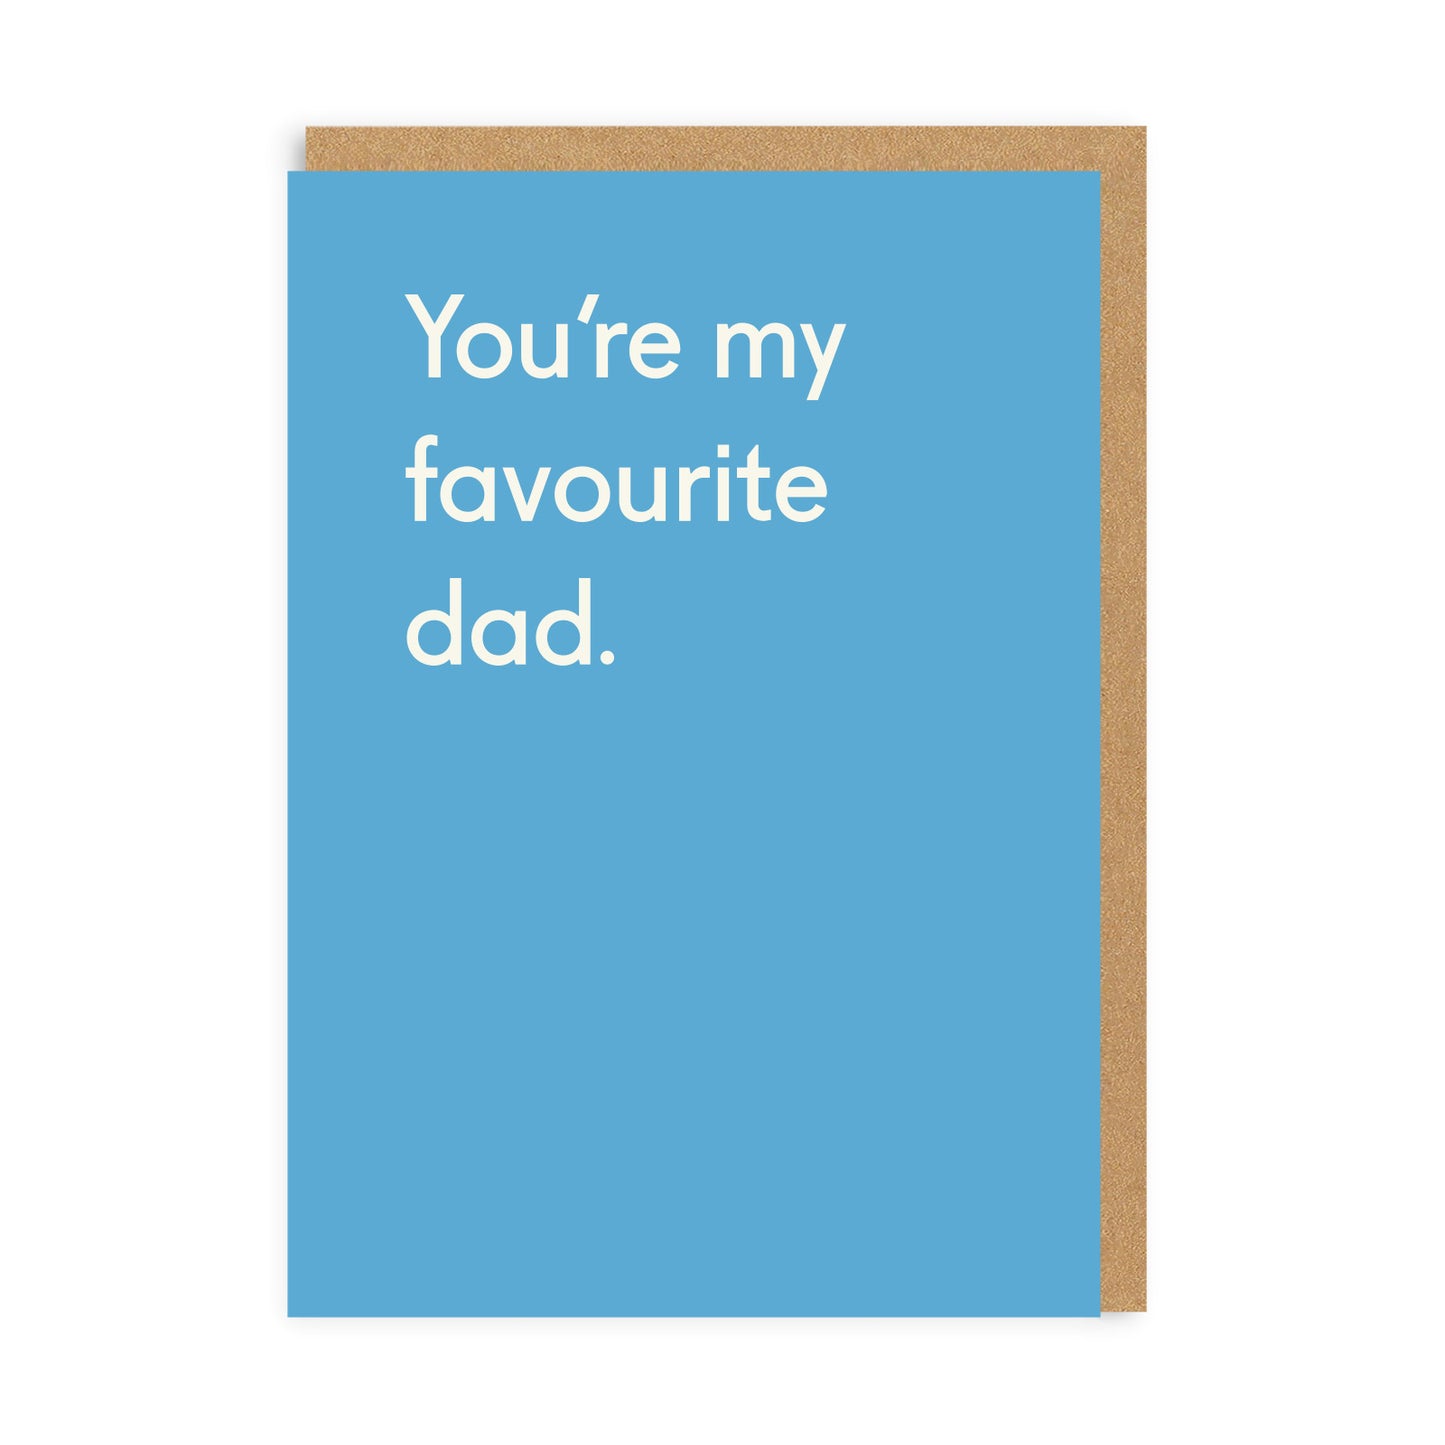 Favourite Dad Greeting Card